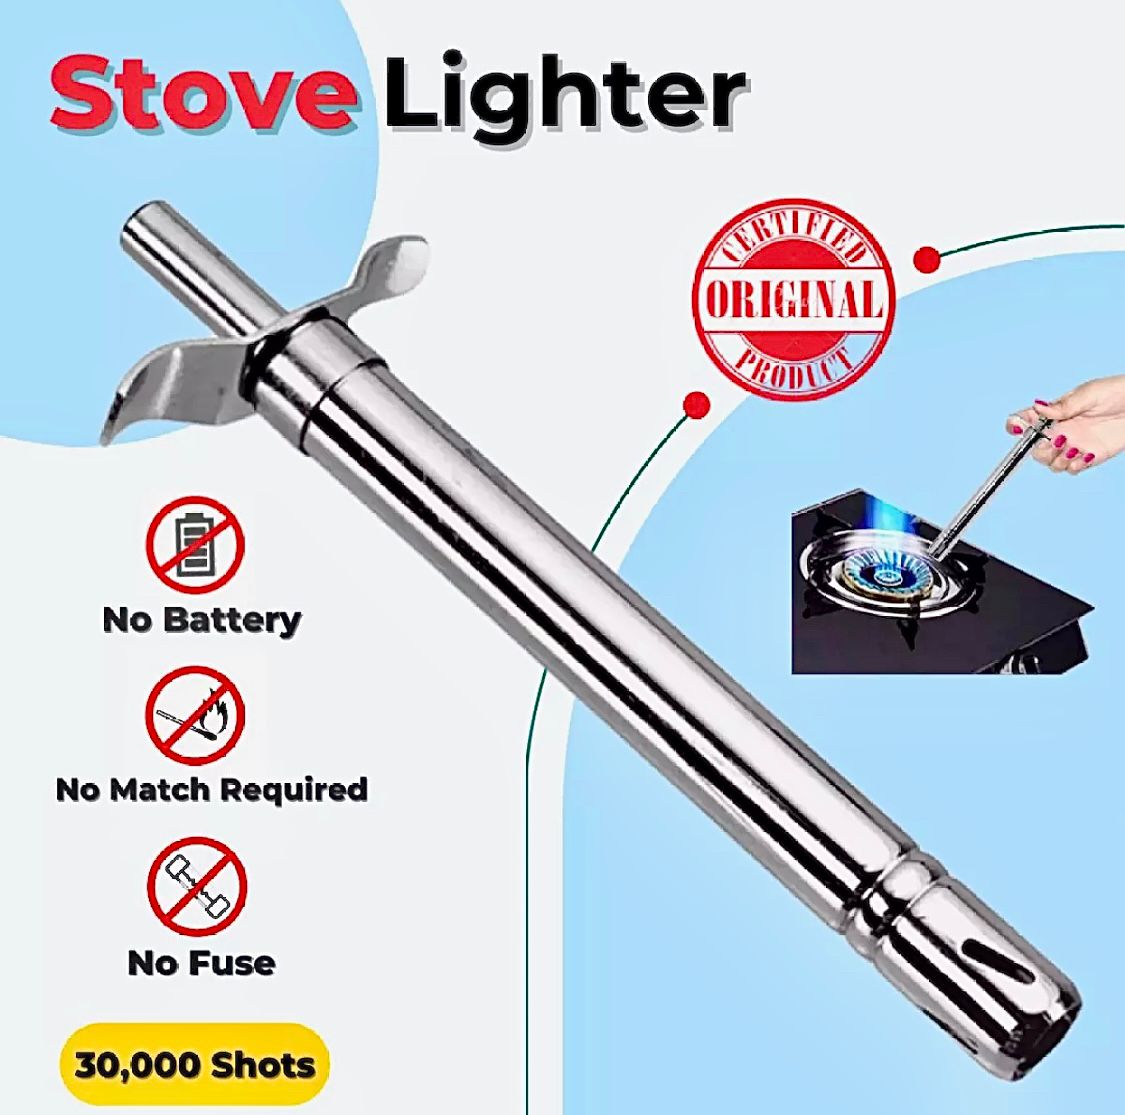 Automatic Kitchen Stove Helper| Stainless Steel, No Batteries, No Cells, No Refill Required